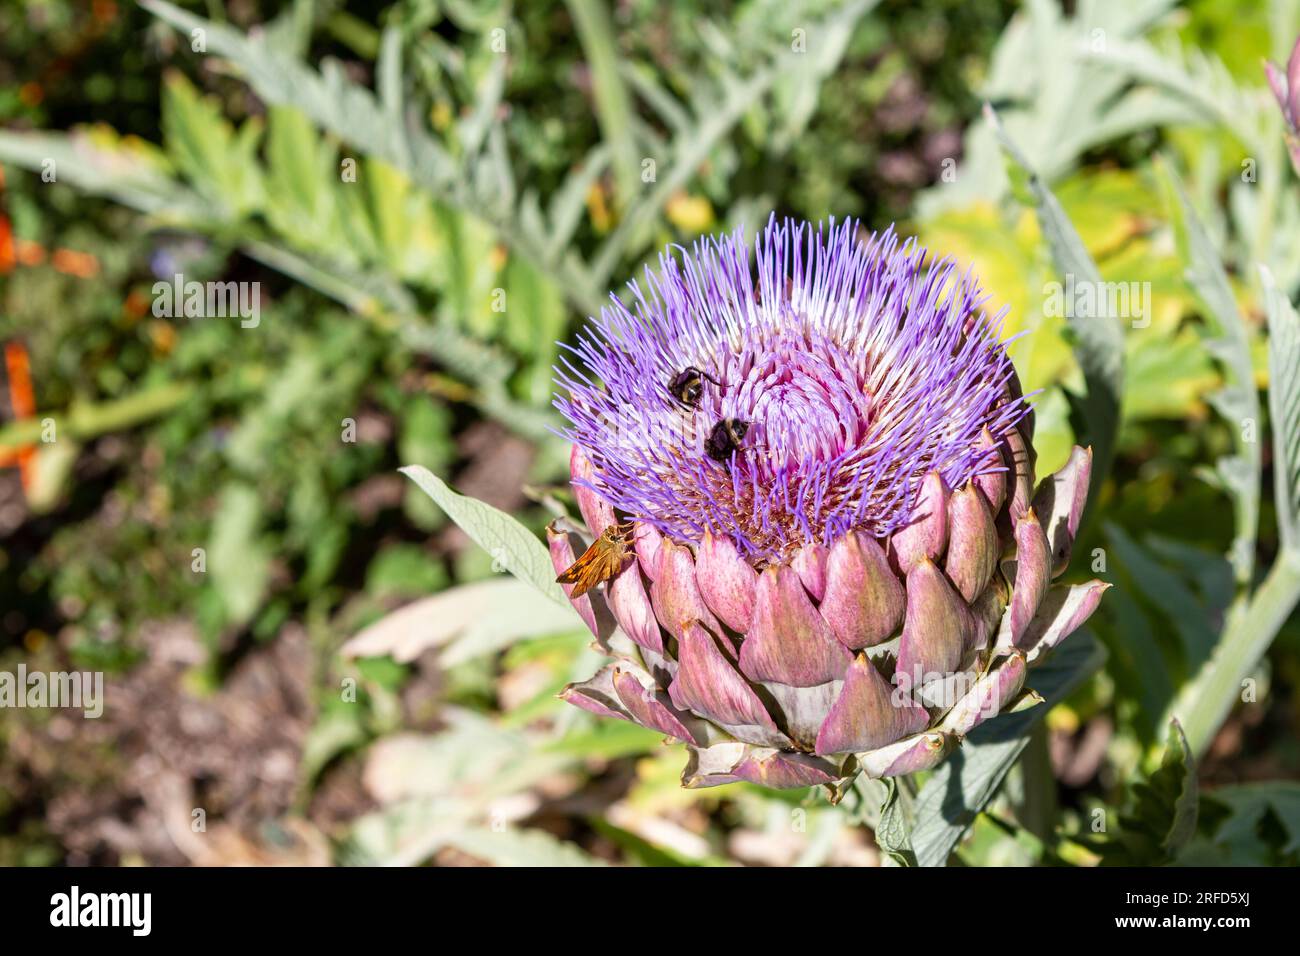 A blooming Globe artichoke flower attracts pollinators, including the Yellow bumble bee (Bombus fervidus) and Fritillary butterfly, to a home garden. Stock Photo